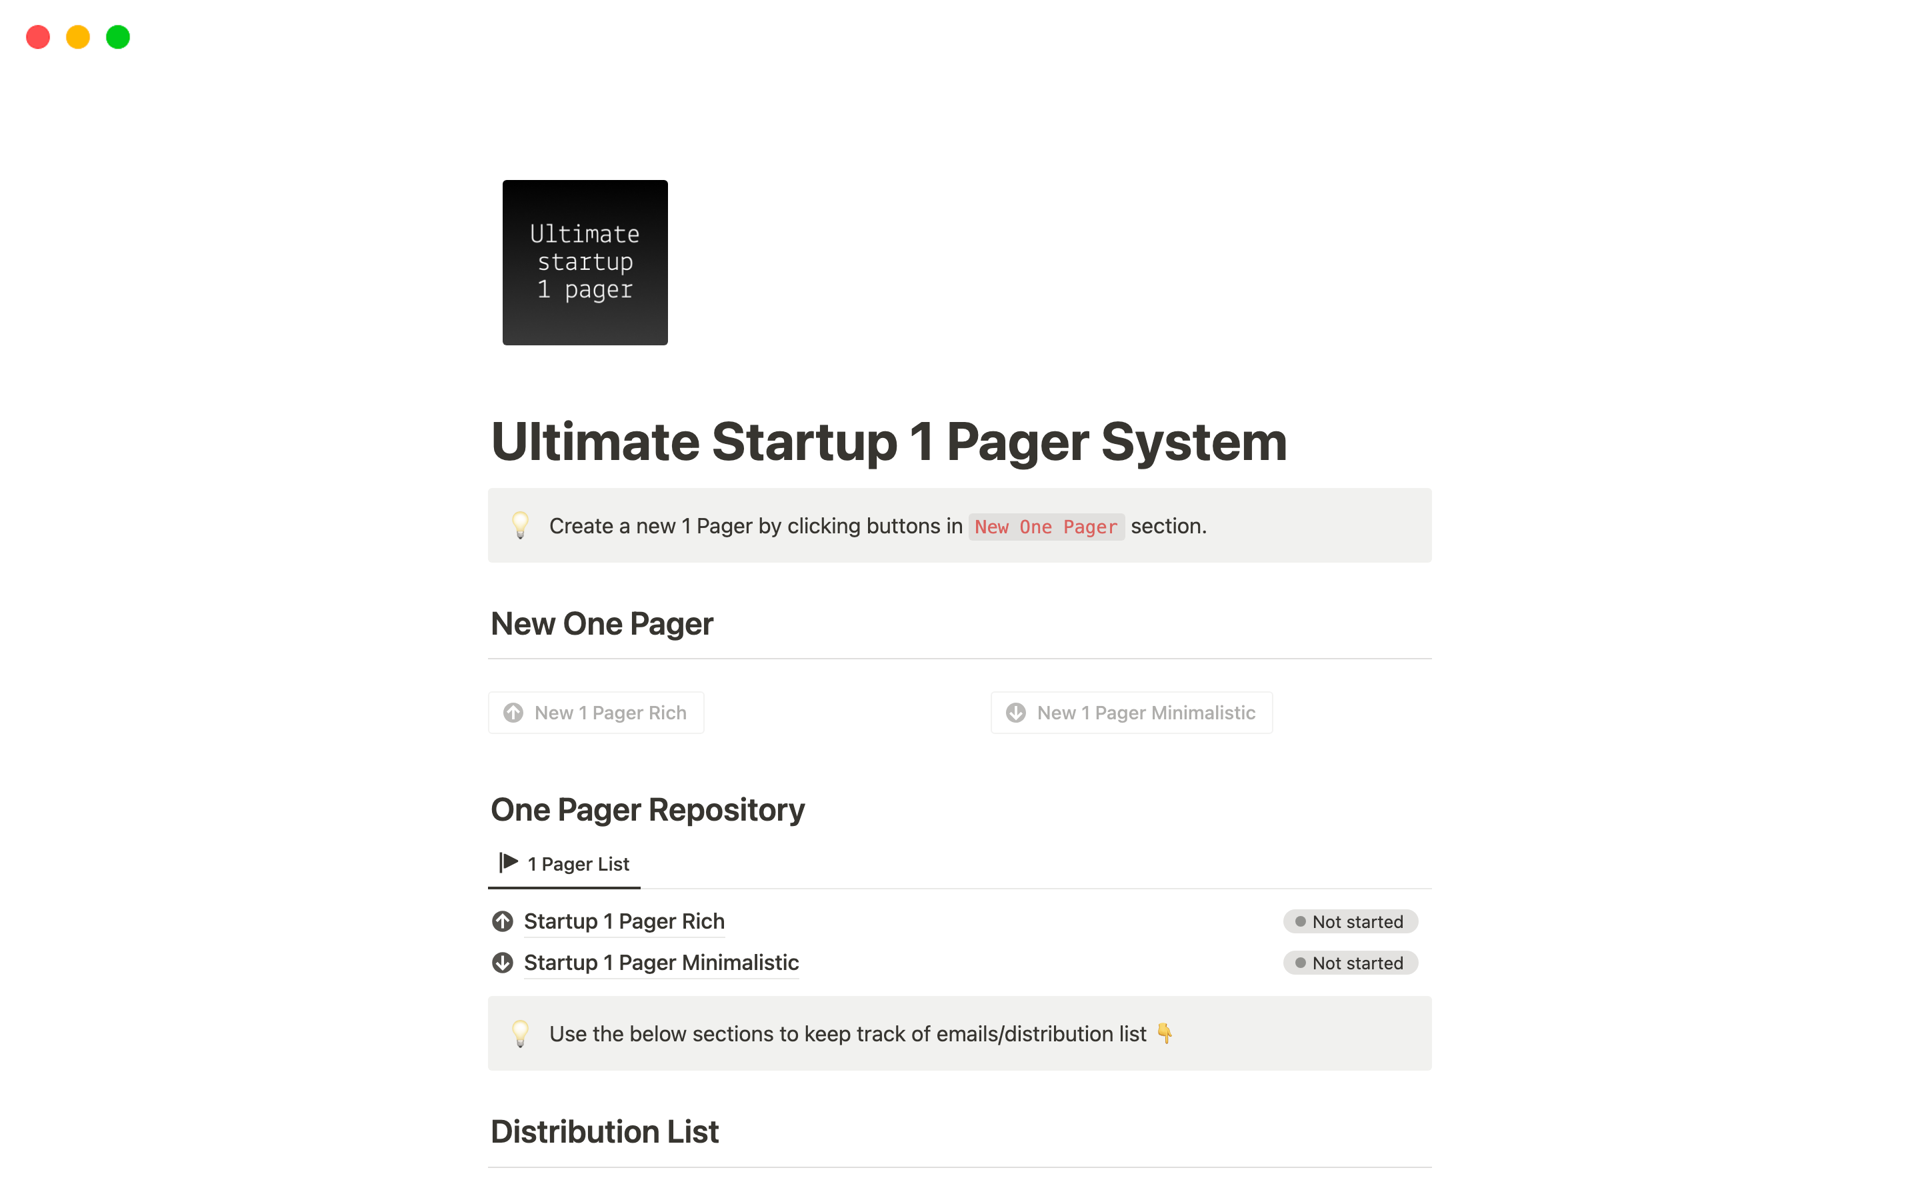 Ultimate Fundraising 1 Pager System for Startups